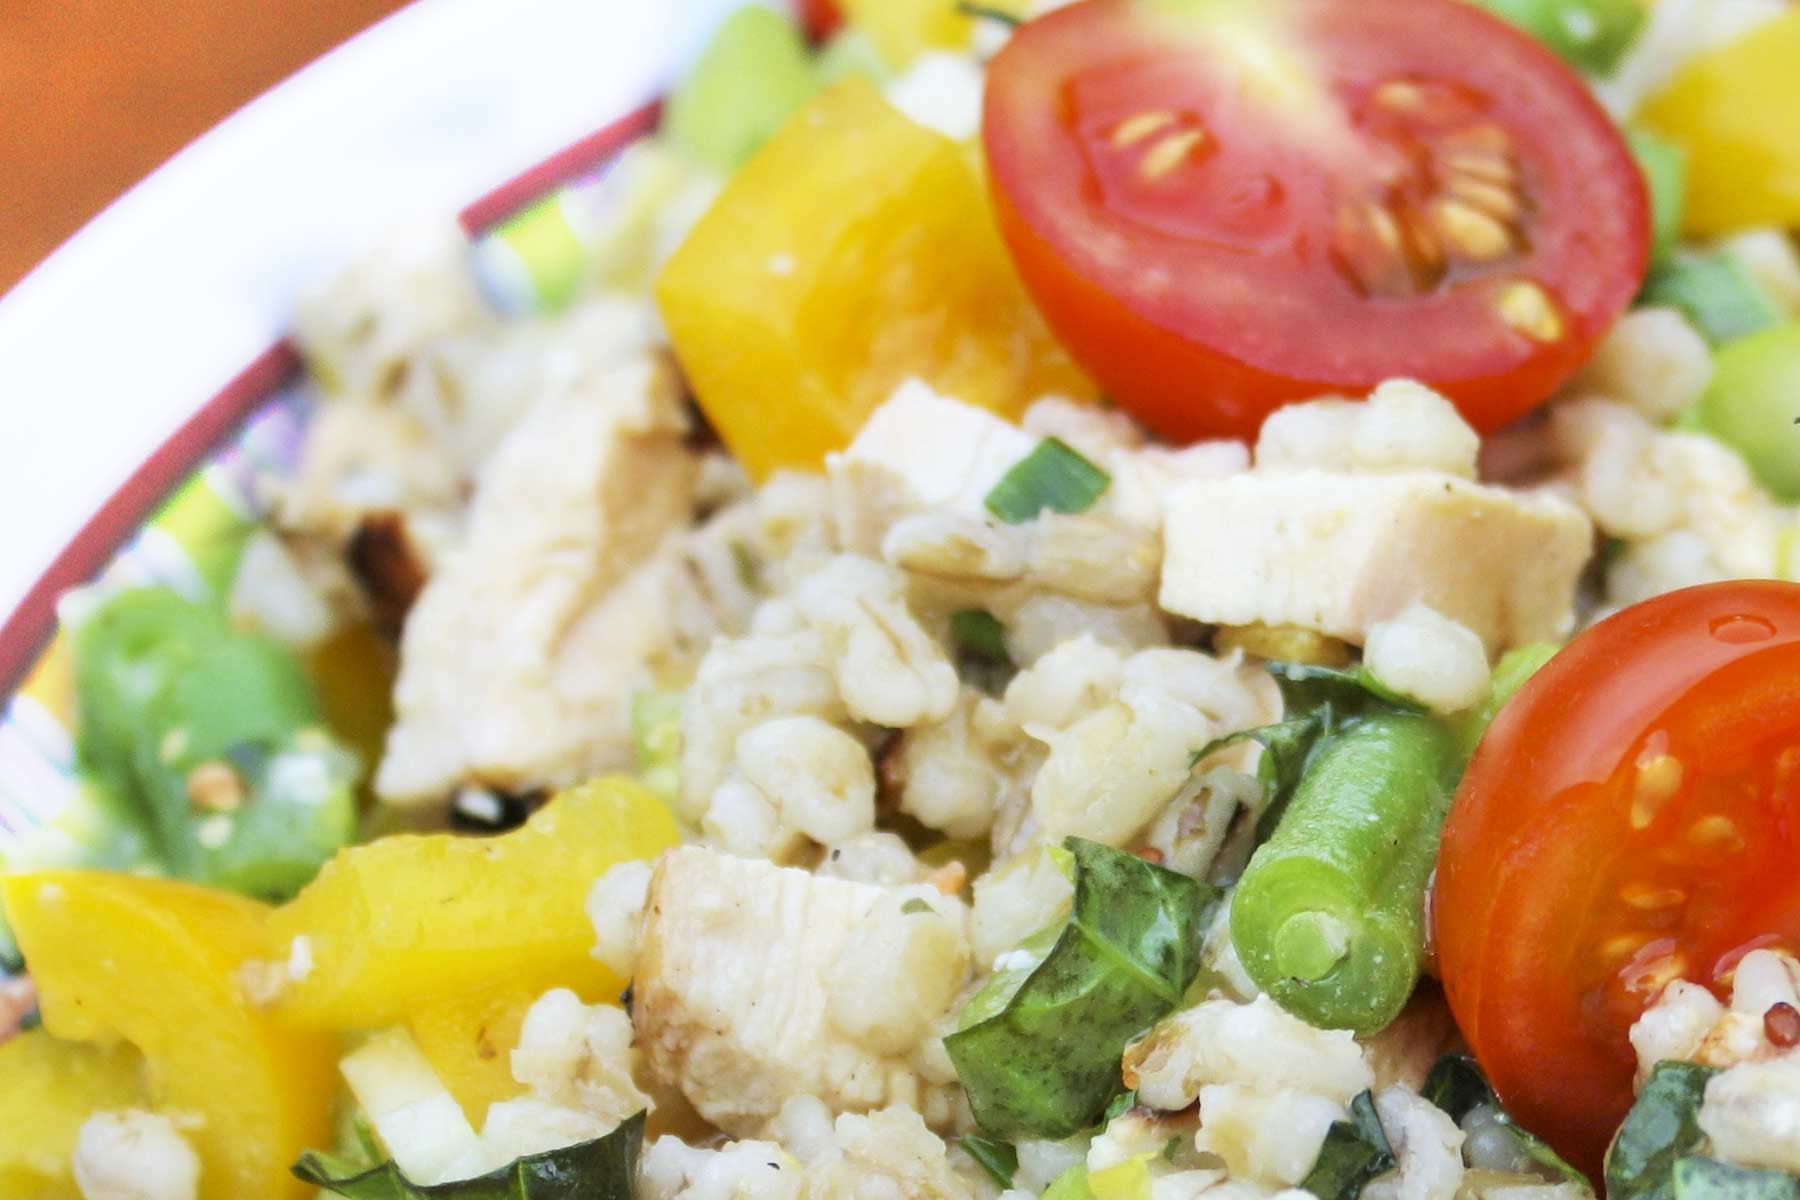 Add quinoa to your favorite salad and enjoy!